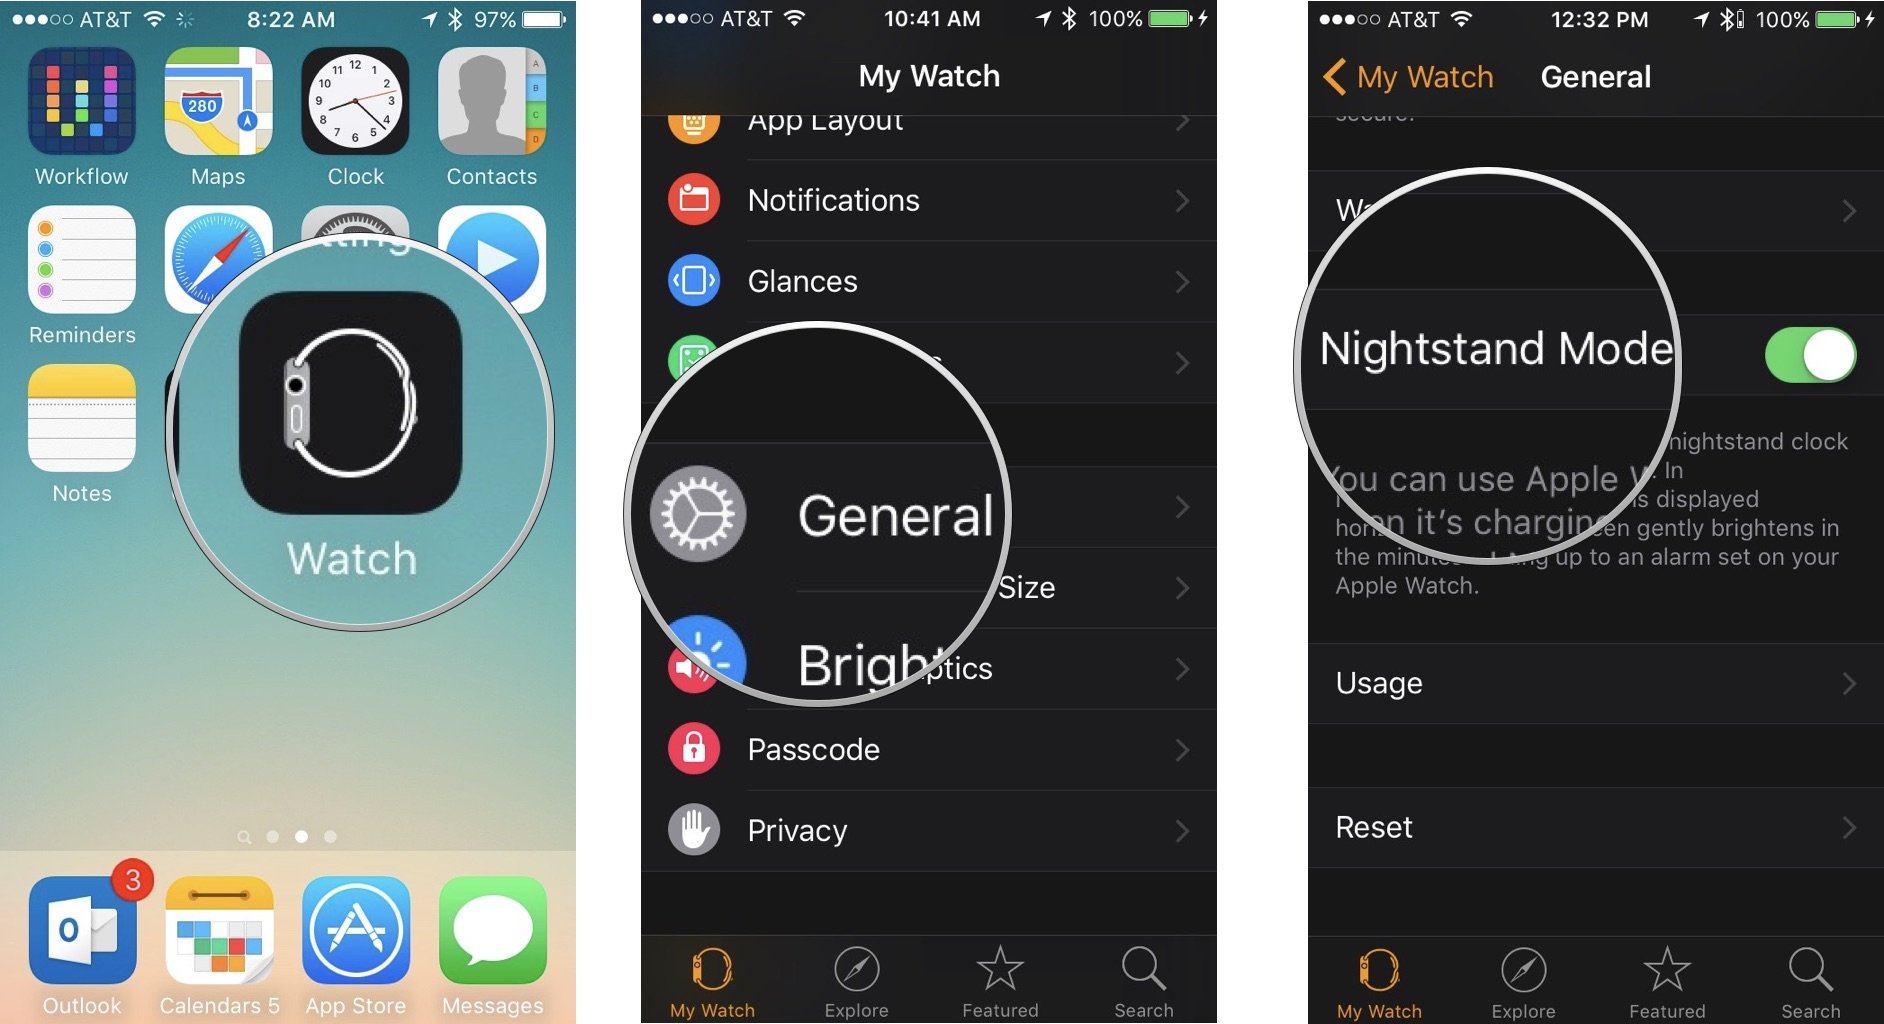 Enabling Nightstand mode for Apple Watch on iPhone